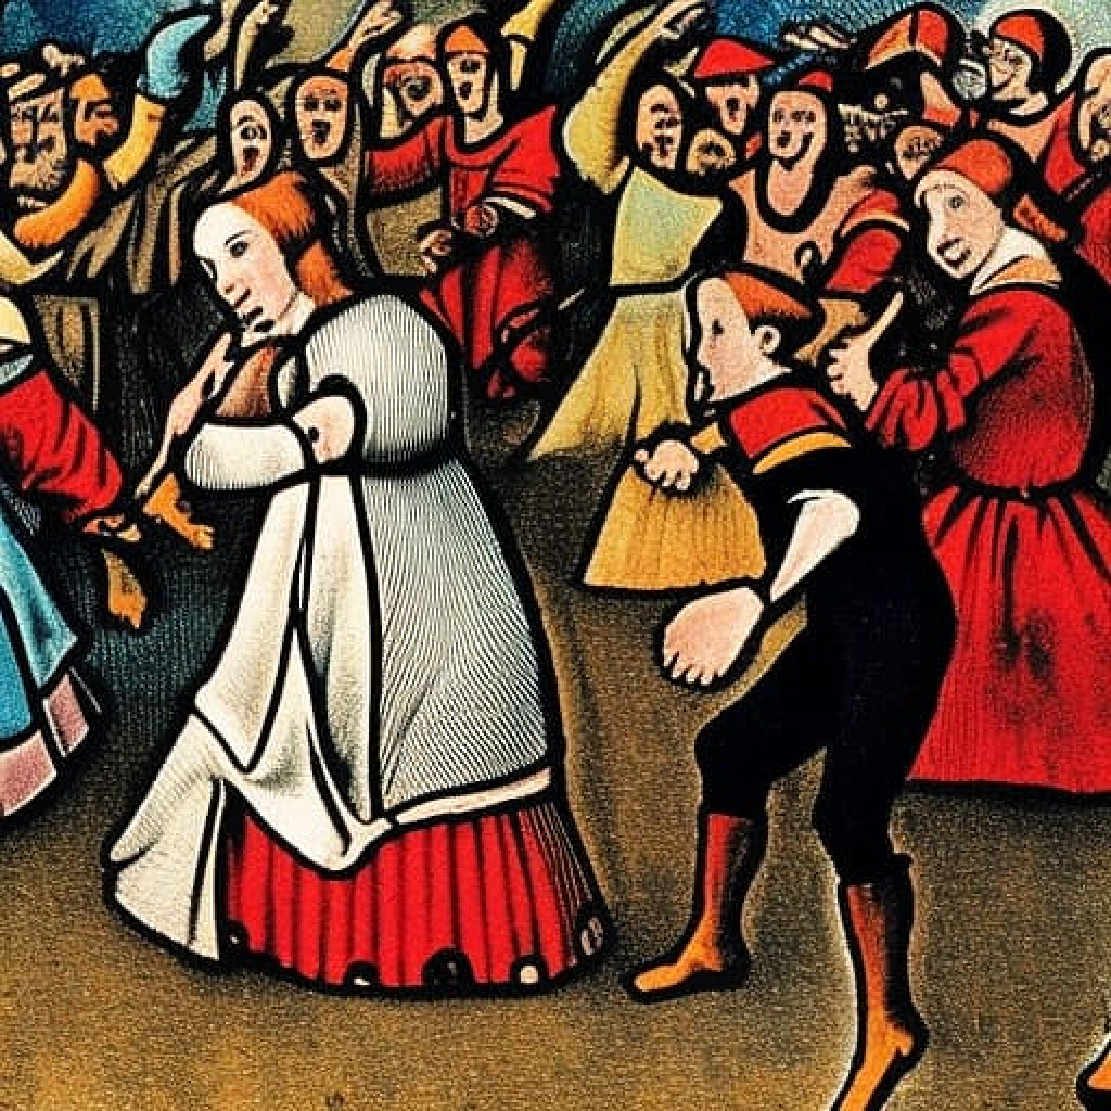 What Caused the Dancing Mania?